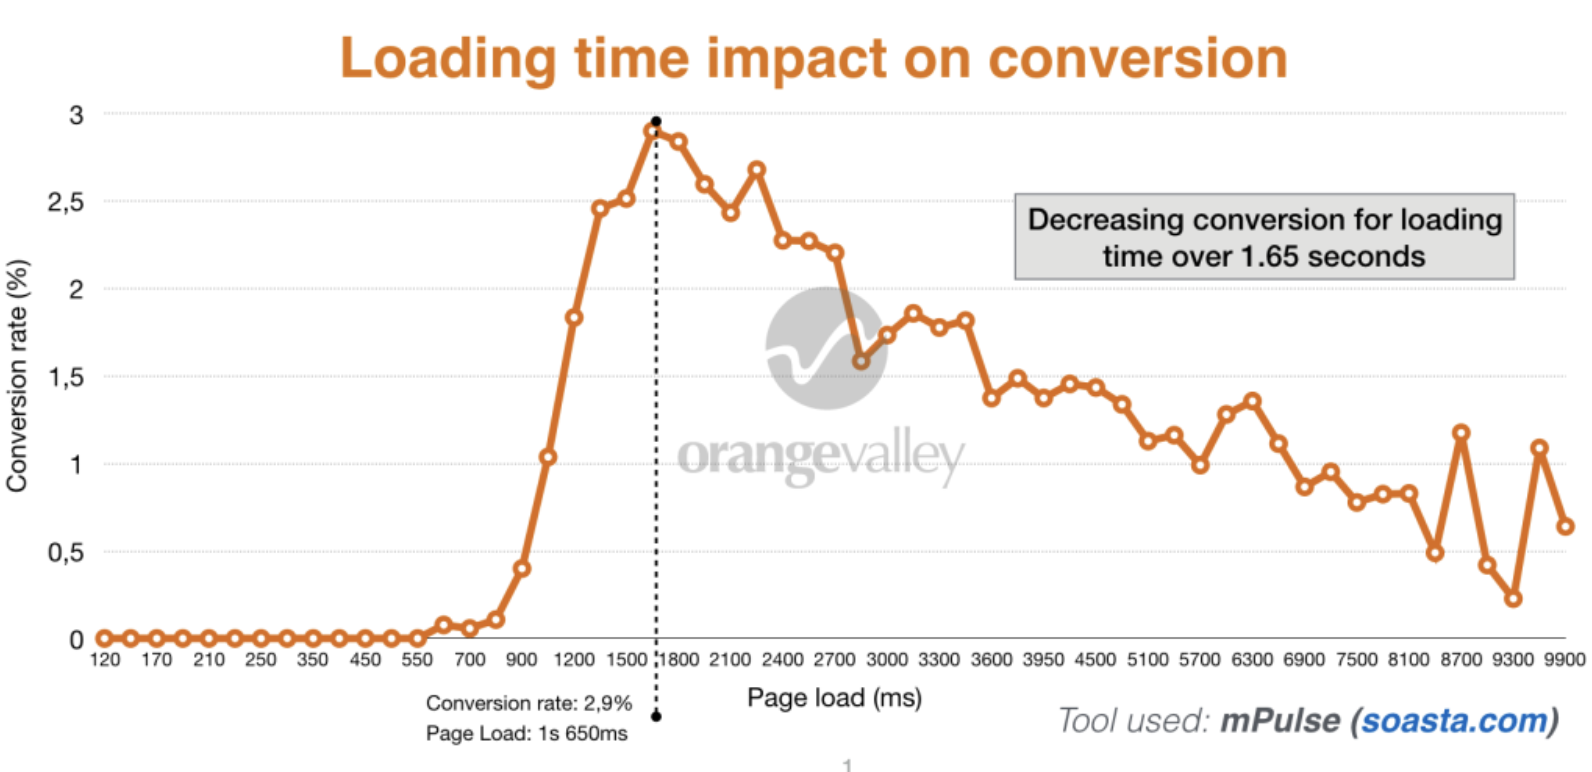 page load speed affects conversions